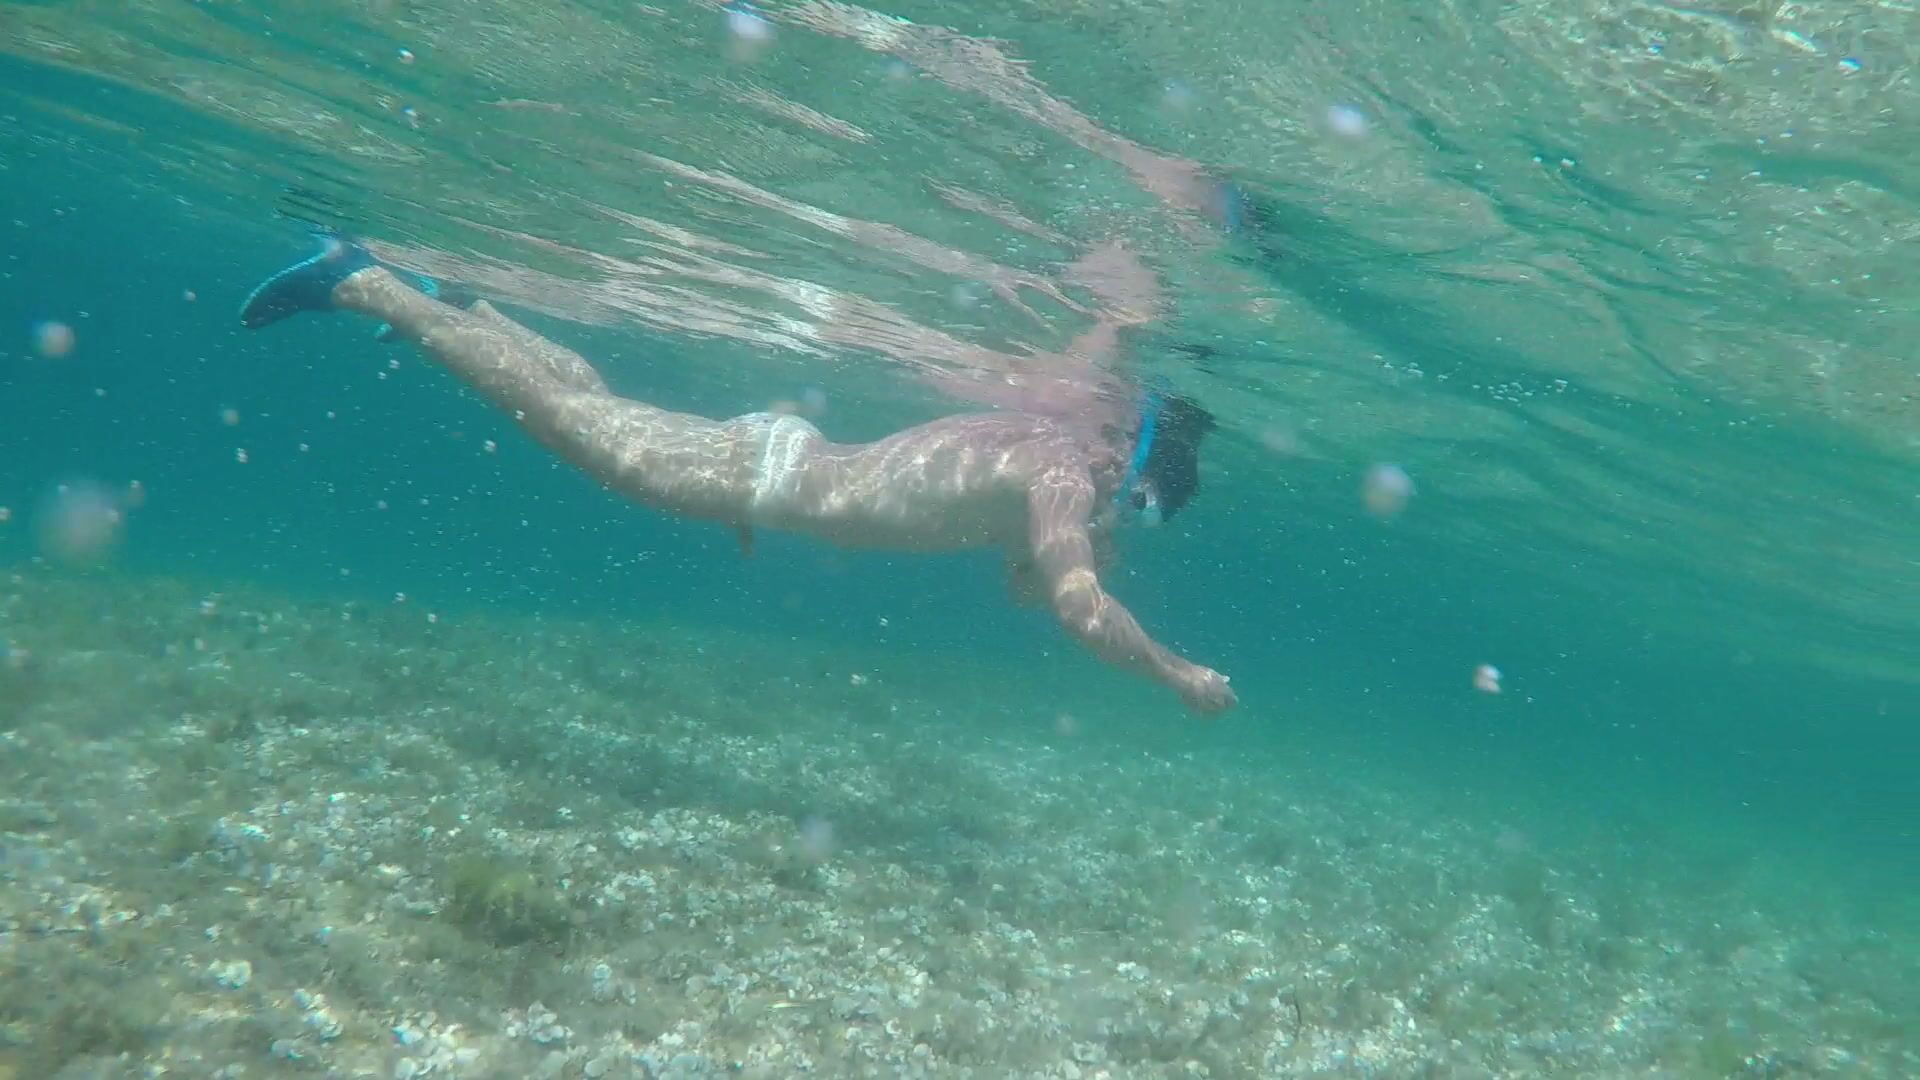 Swimming and snorkeling naked...I love that feeling.